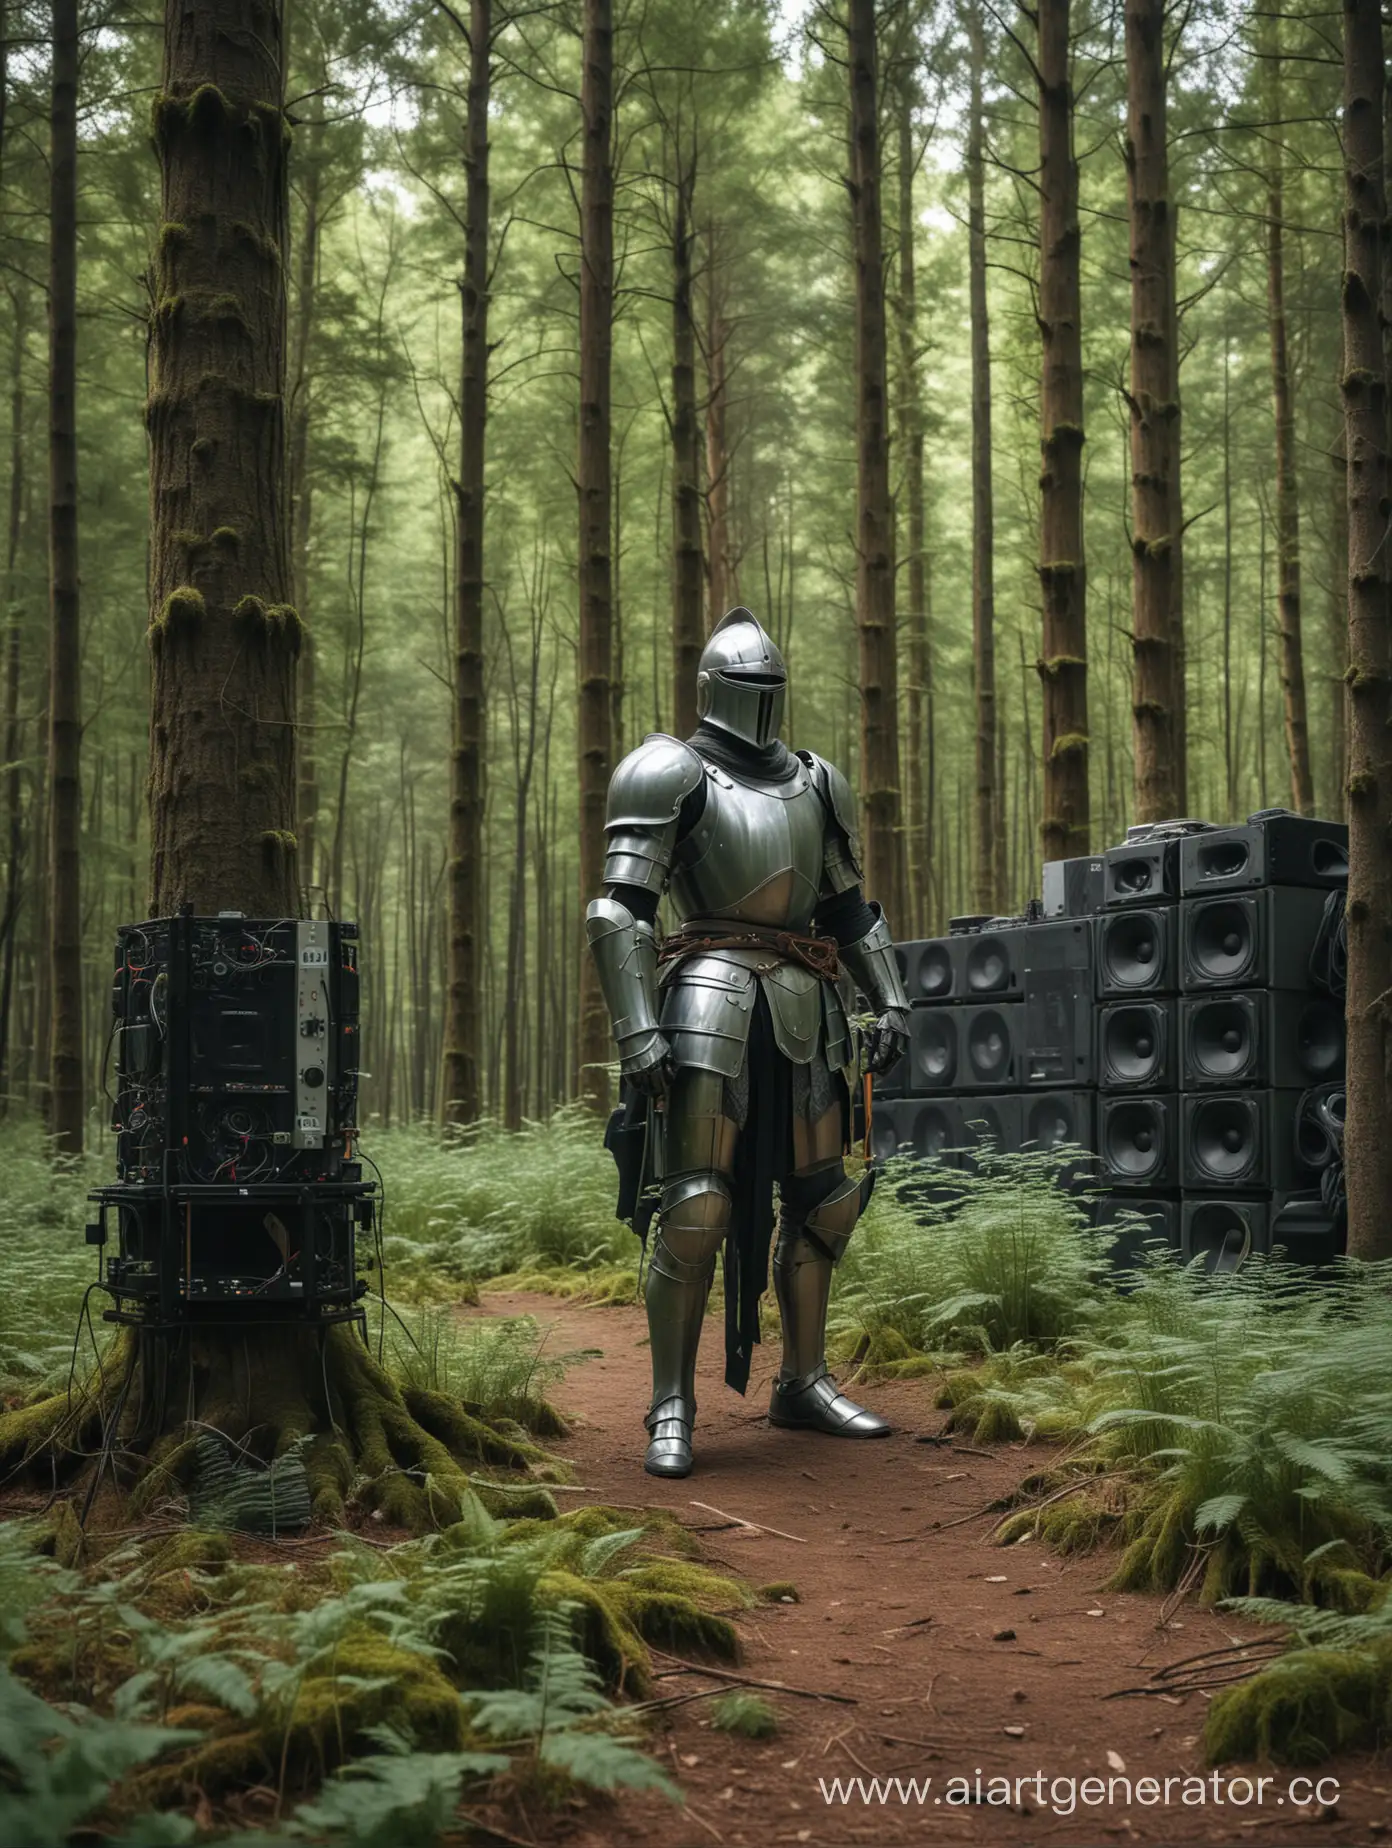 Knight-in-Verdant-Forest-with-Massive-Sound-System